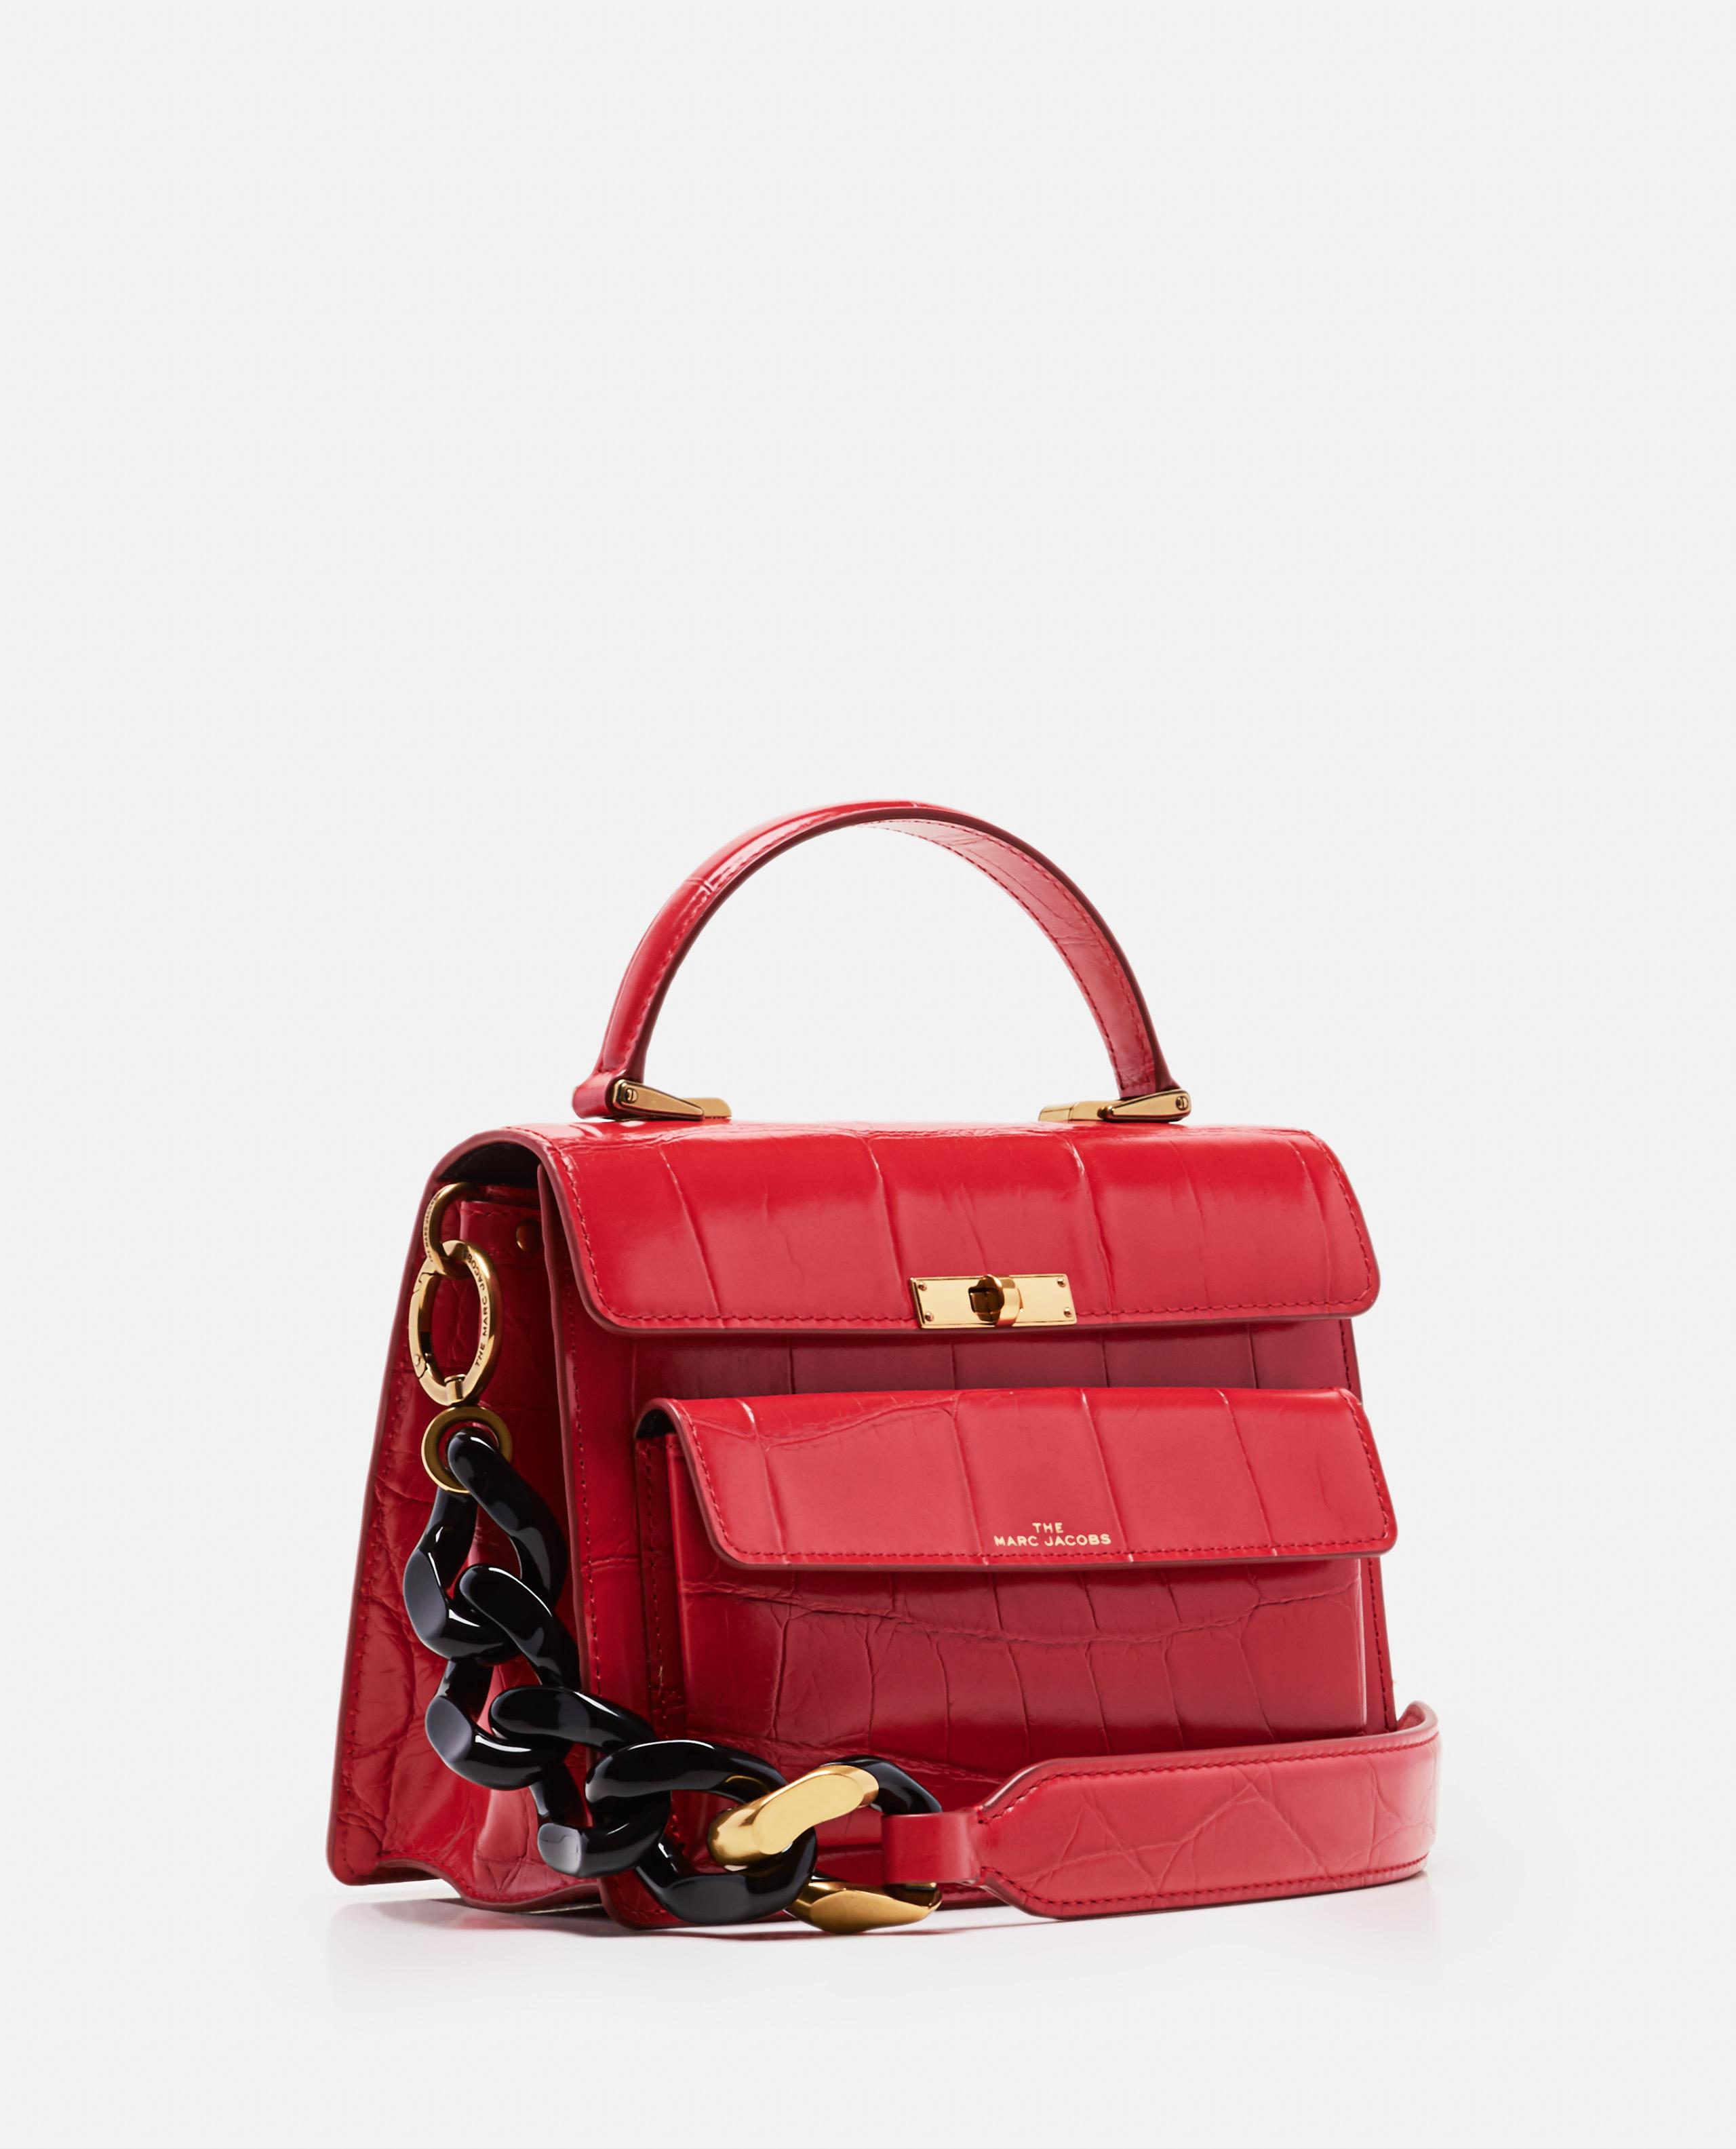 Marc Jacobs Leather The Uptown Croc Bag Bag in Red - Lyst